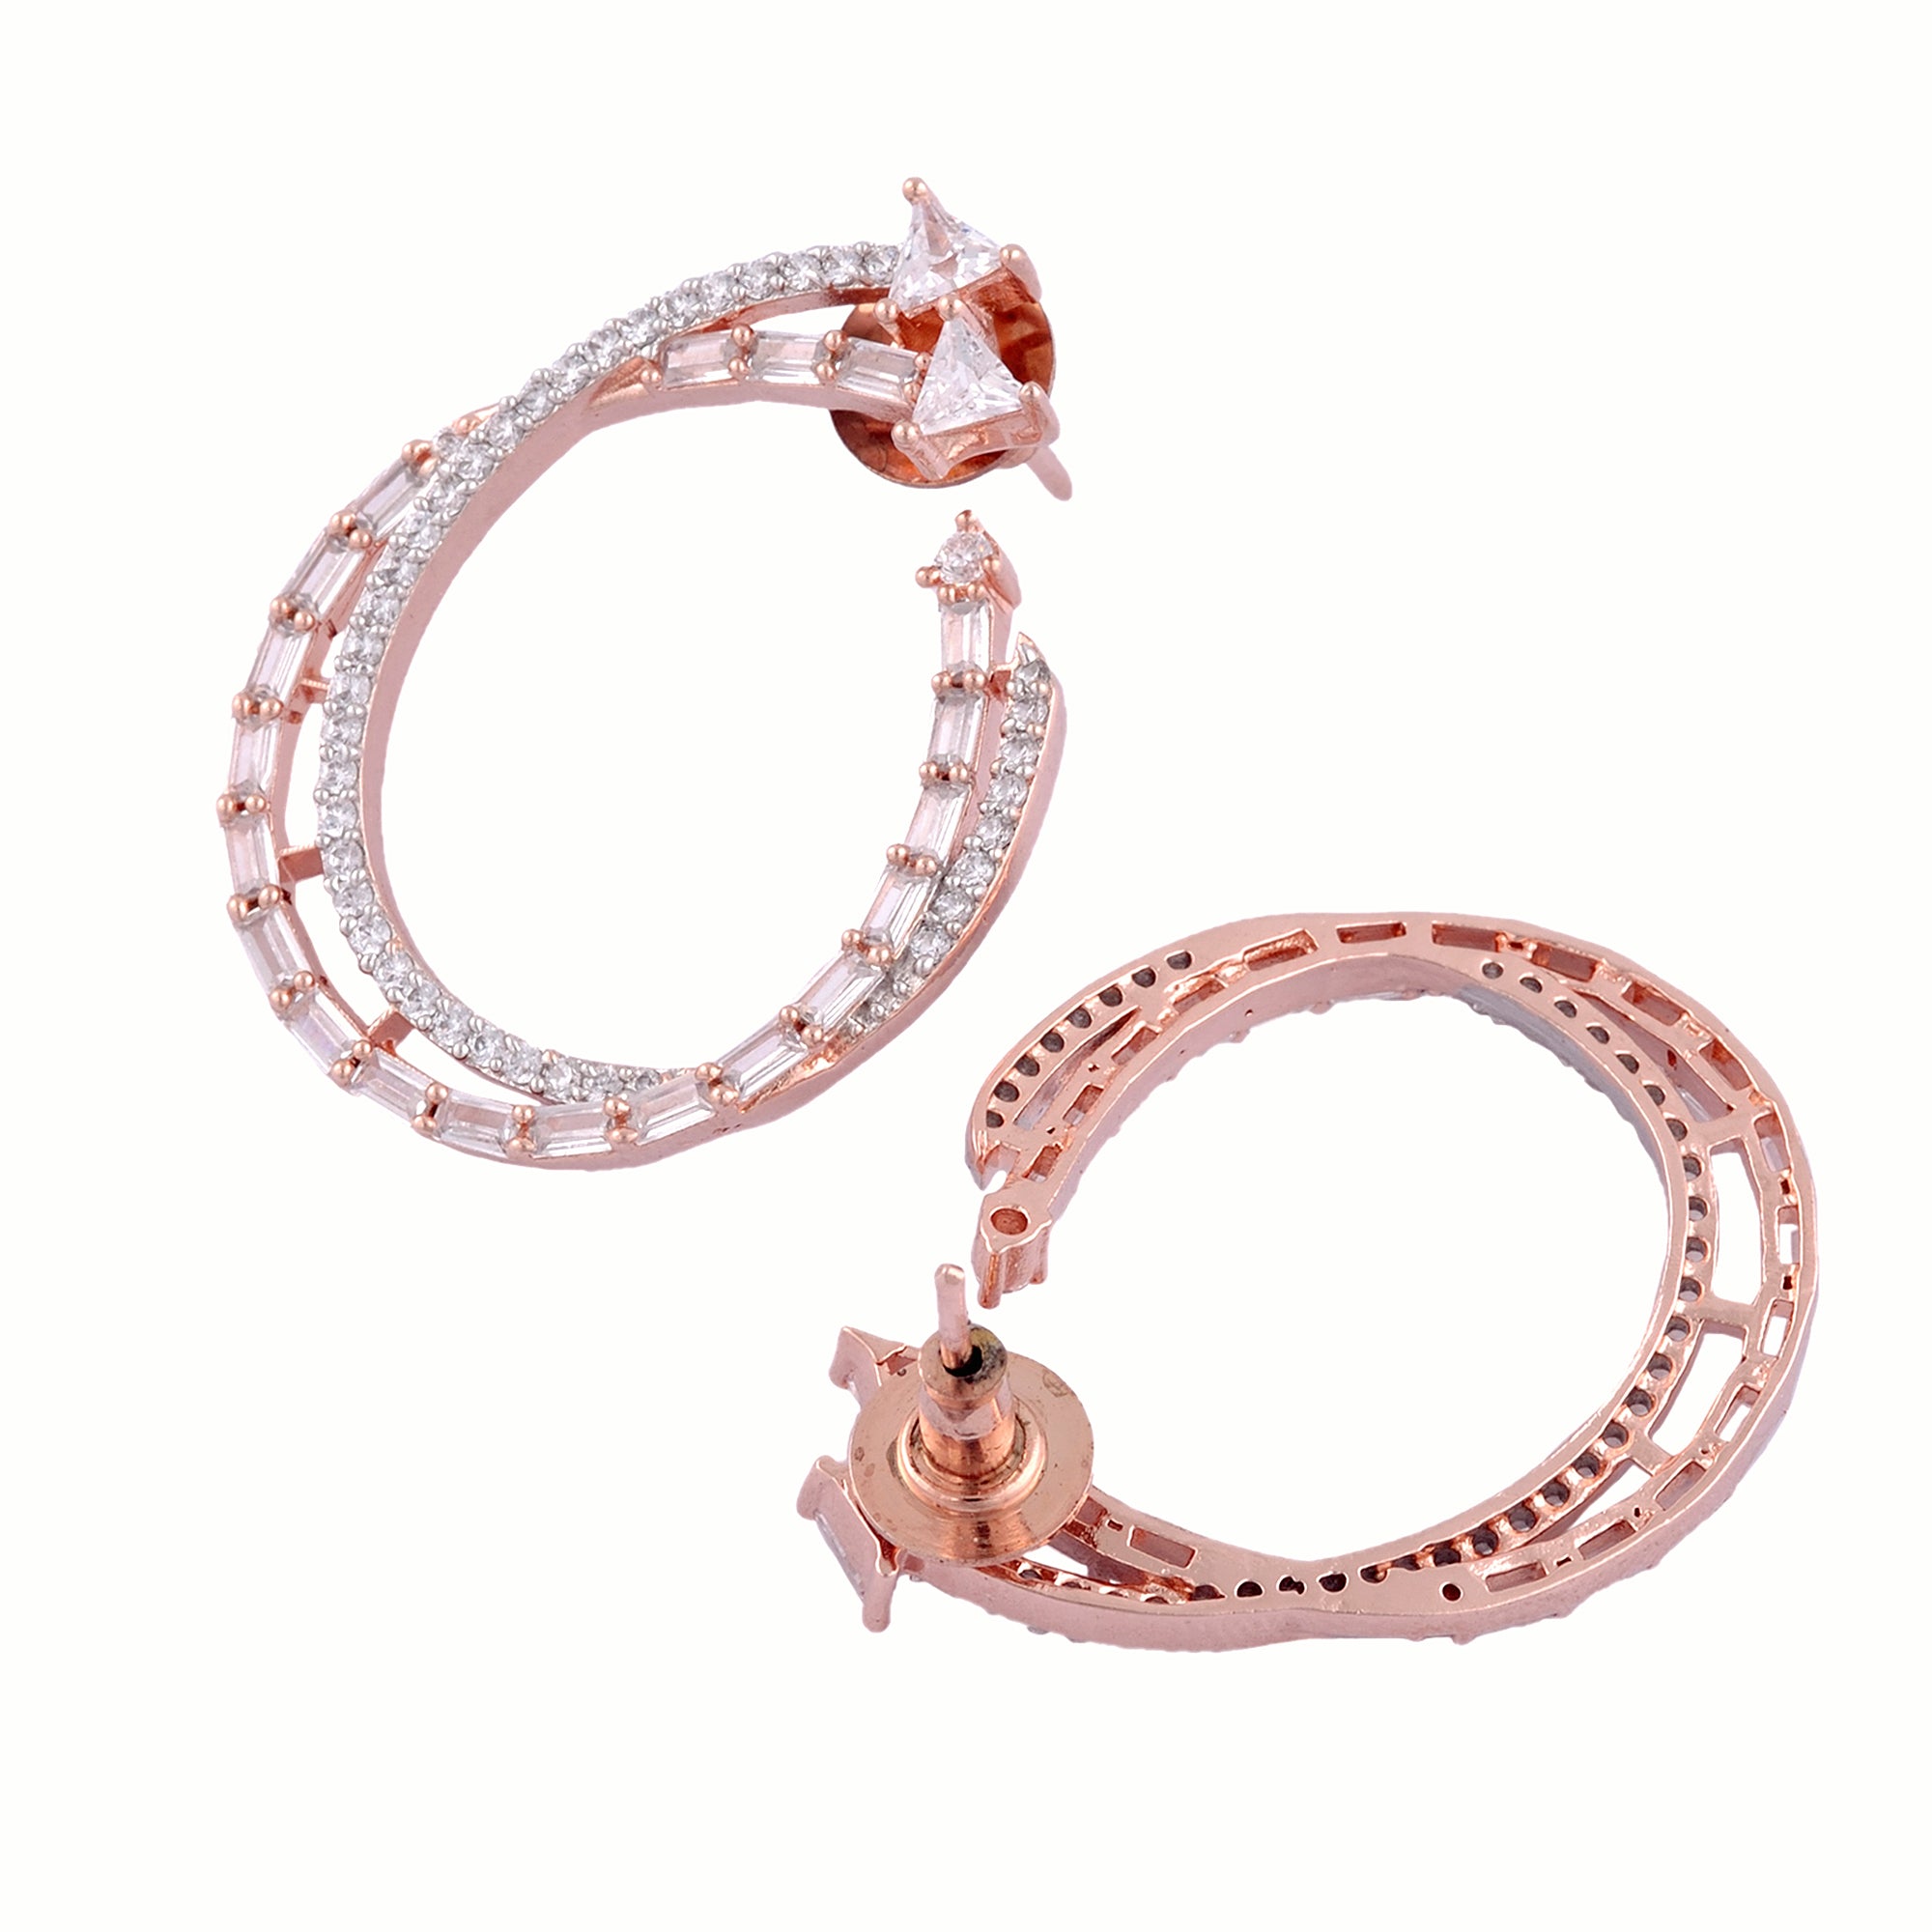 Stylish Party Wear Rose Gold Plated Ad Studded Handcrafted Earrings for Women and Girls - Saraf RS Jewellery